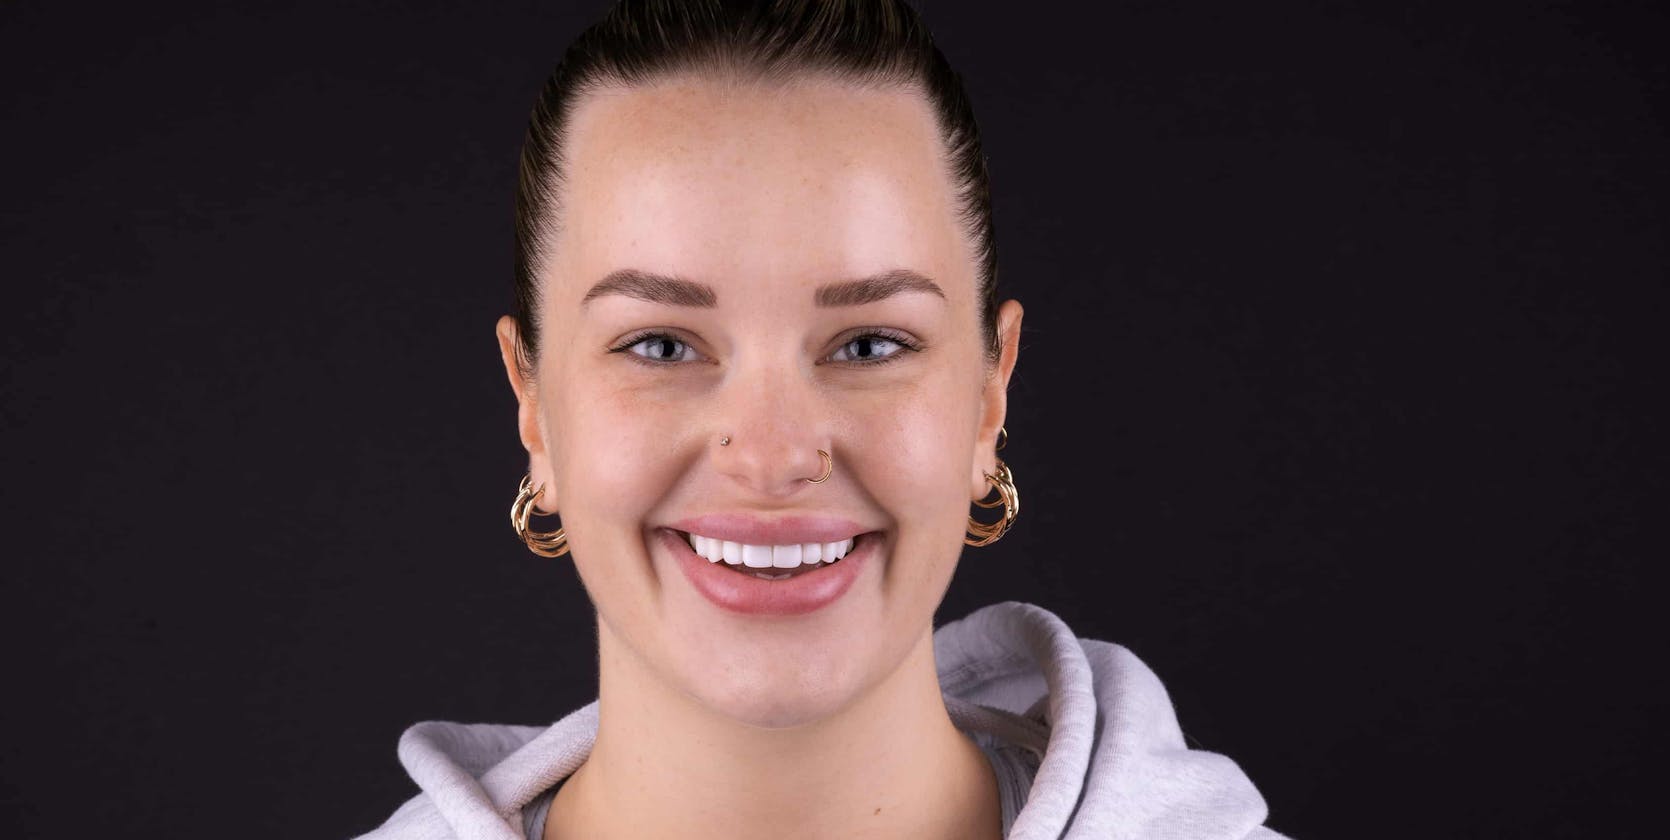 Smile makeover with wisdom teeth removal